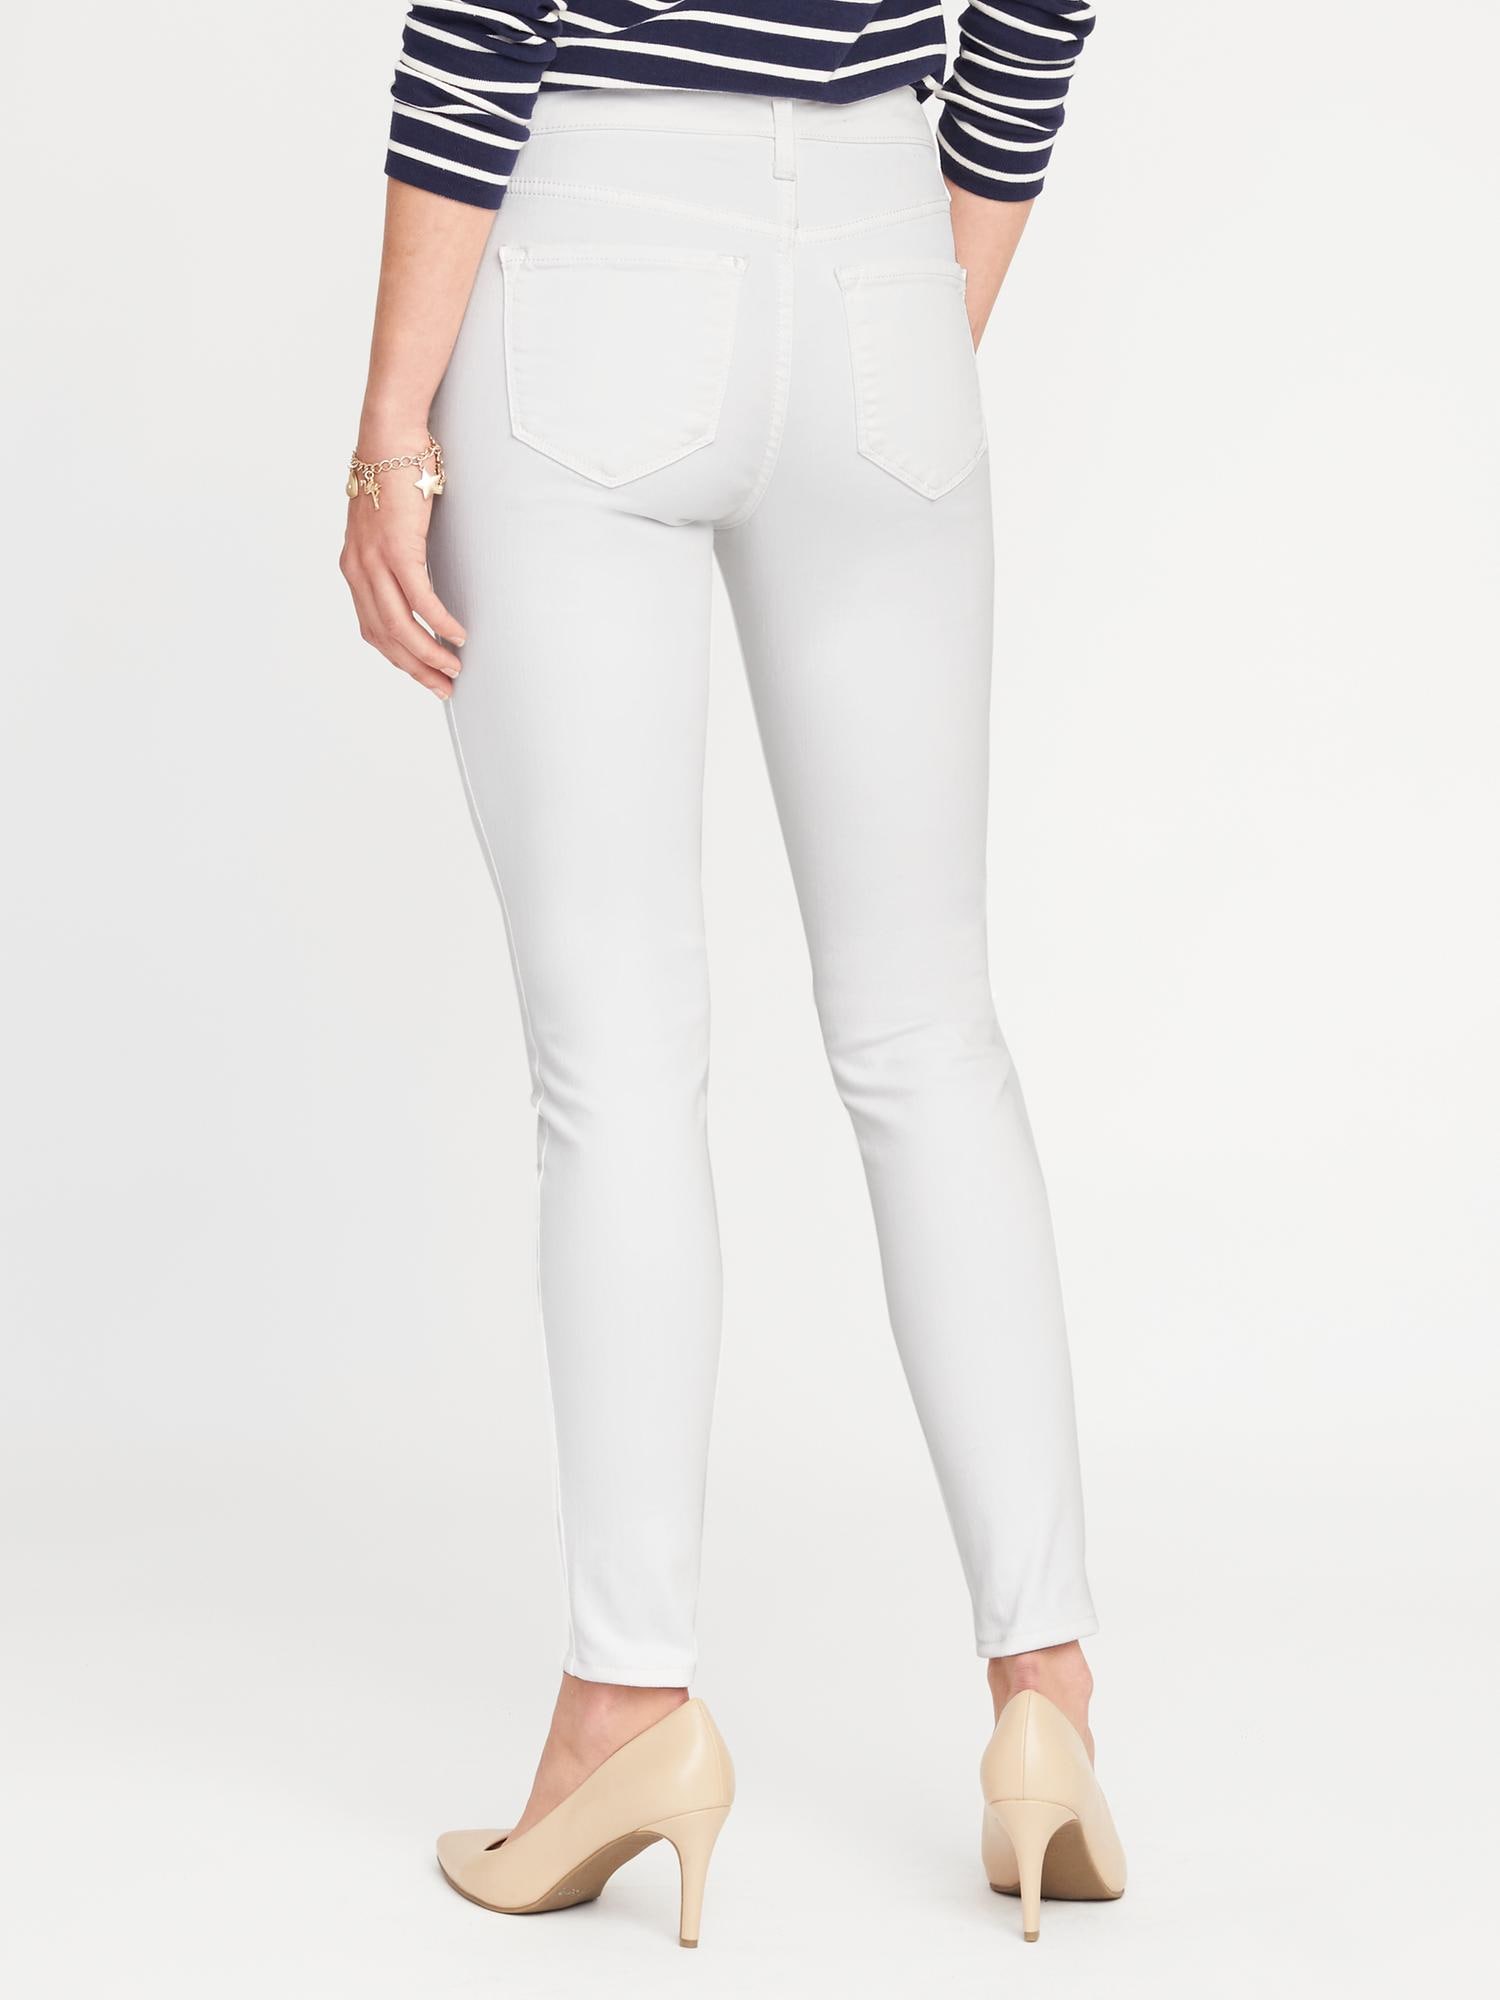 Mid-Rise Built-In-Sculpt Rockstar Jeans for Women | Old Navy